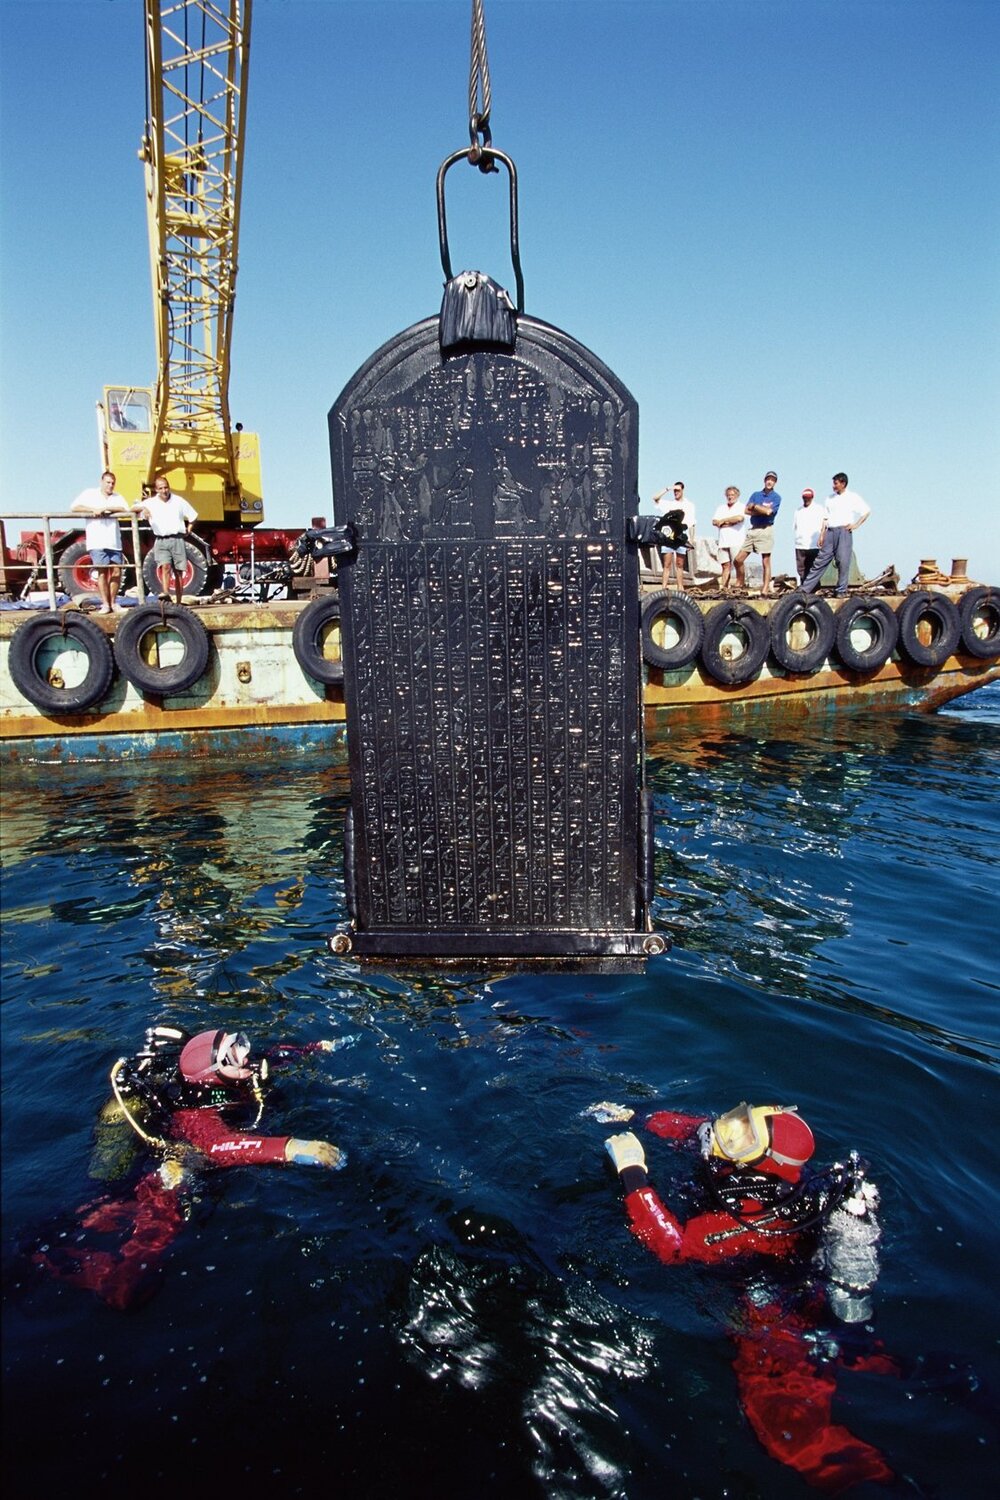 The stele of Heracleion (378-362 BC)